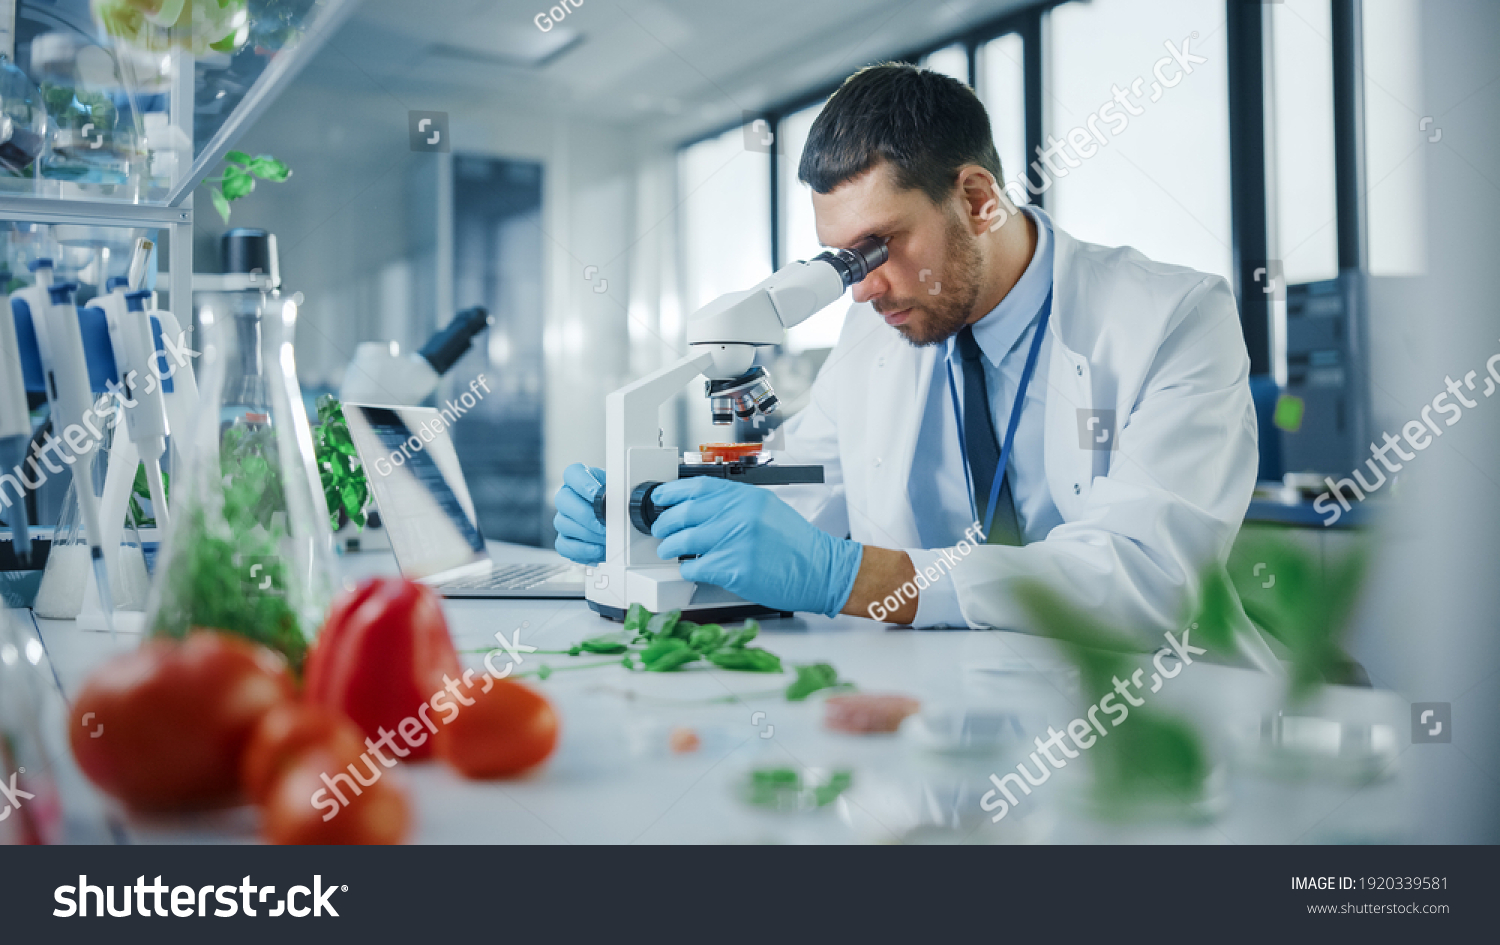 Handsome Male Scientist in Safety Glasses Analyzing a Lab-Grown Tomato Through an Advanced Microscope. Microbiologist Working on Molecule Samples in Modern Laboratory with Technological Equipment. #1920339581